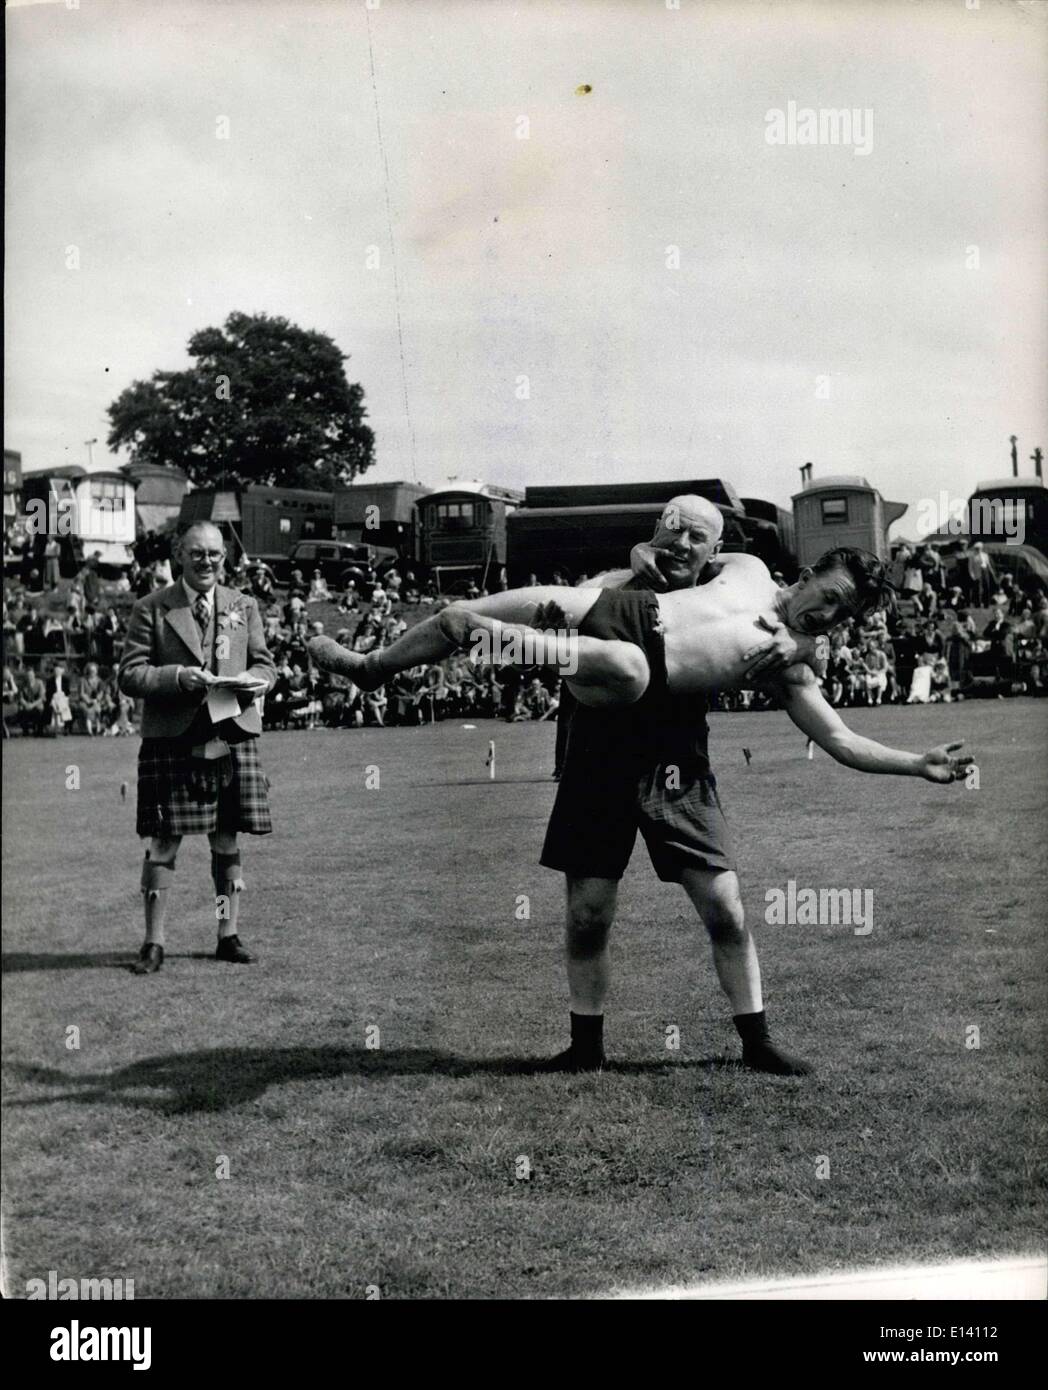 Mar. 31, 2012 - Crieff Highland gathering at Market Park, Crieff. Laurence McGregor, aged 59, the oldest competitor, of Dunfermline, winning the Catch-as-Catch-Can wrestling event. He is twirling Donald Wilson of Dunblane round and round. Stock Photo